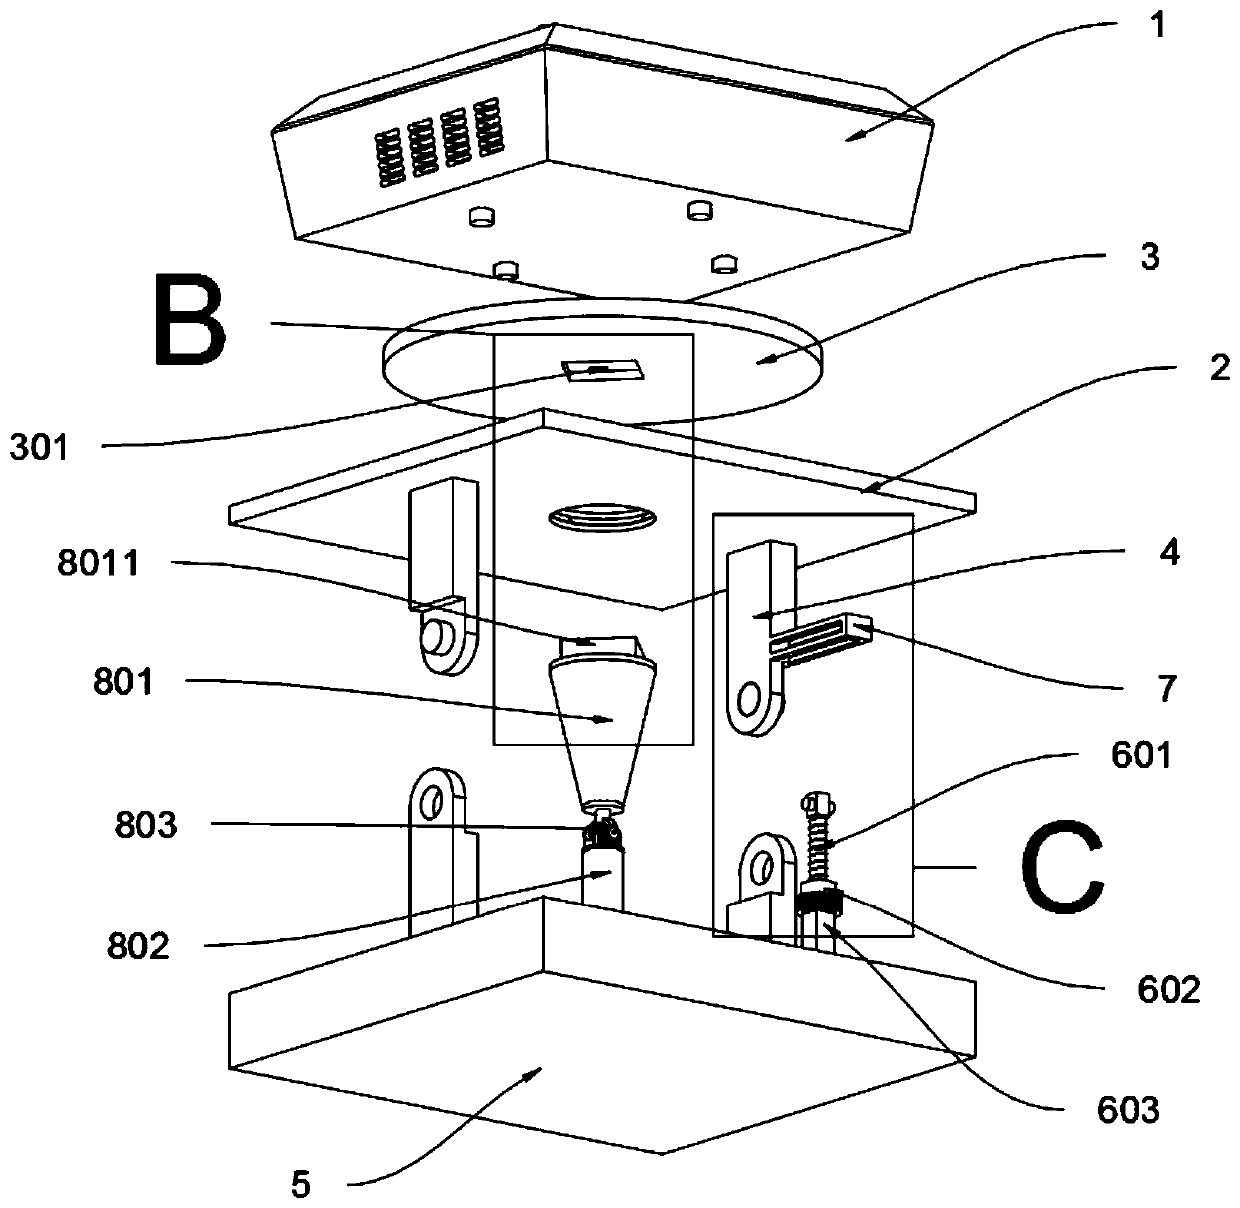 Peripheral wireless connection projection device